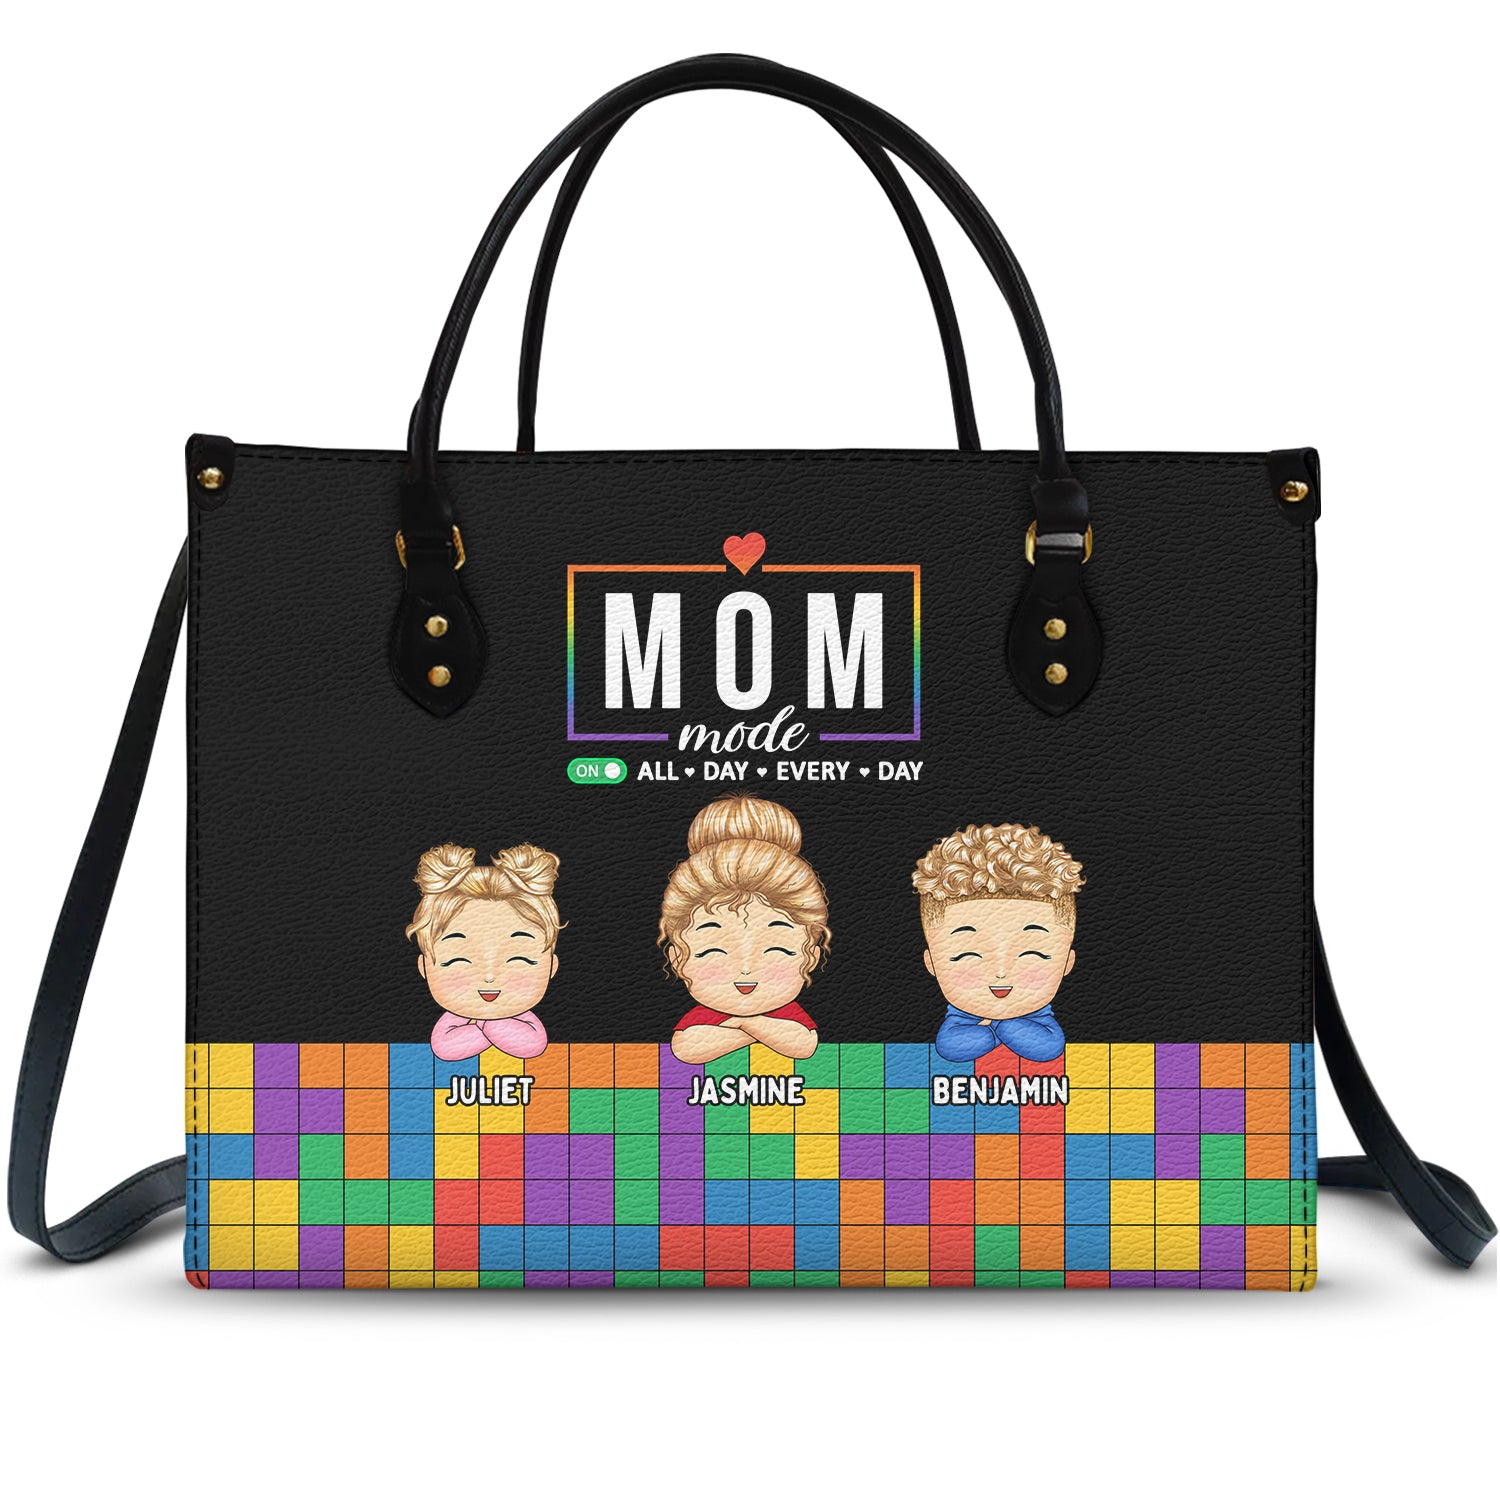 Mom Mode On - Gift For Young Mother - Personalized Leather Bag